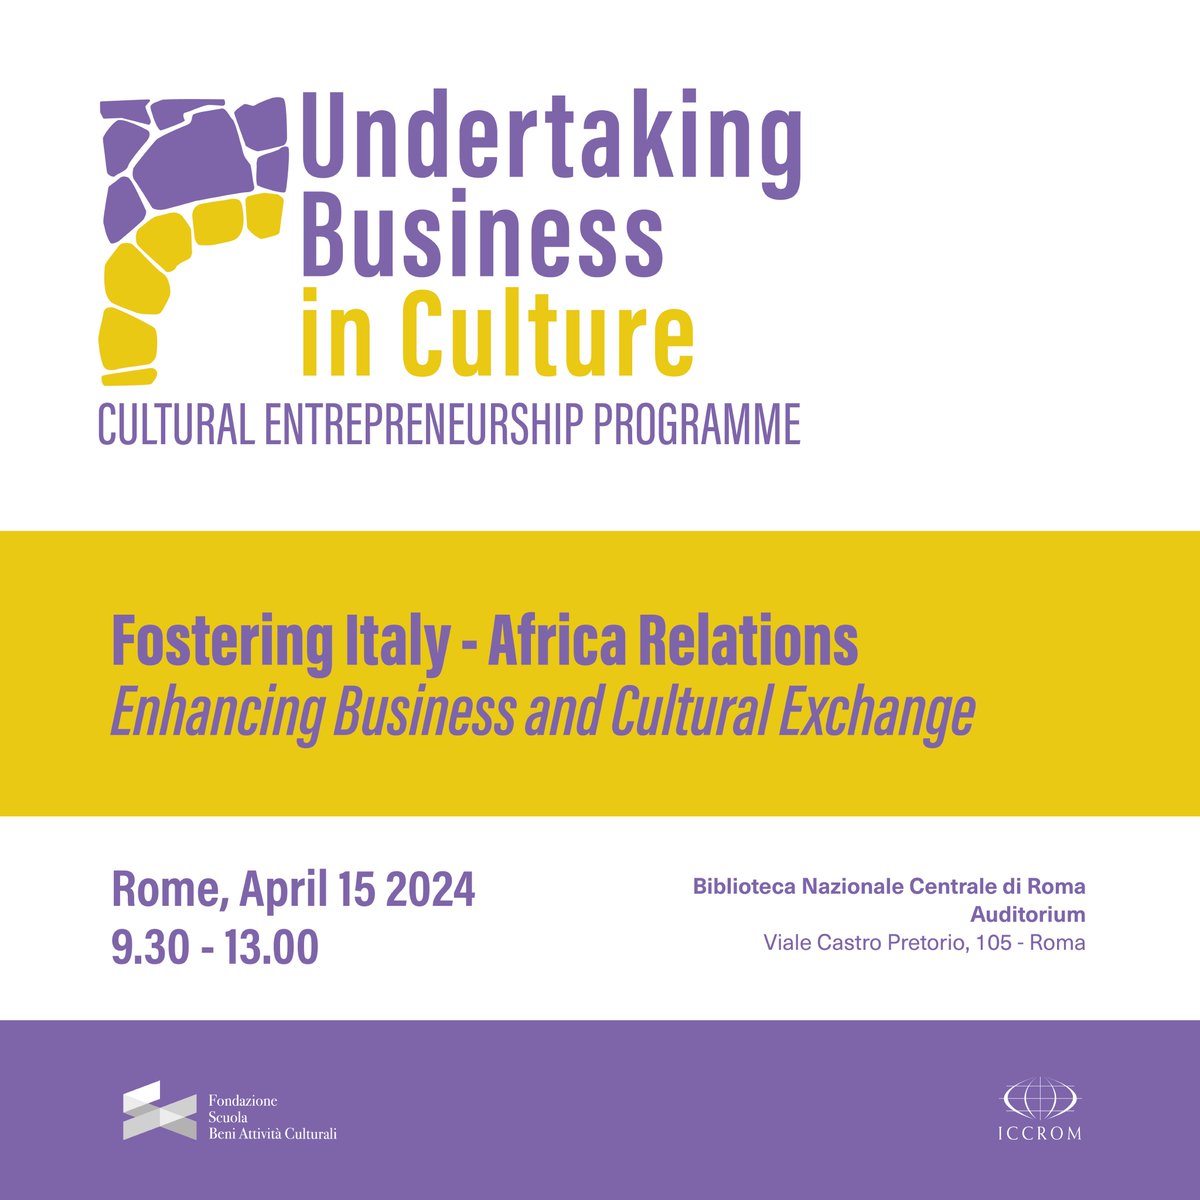 Join us for 'Fostering Italy-Africa Relations: Enhancing Business and Cultural Exchange' hosted by #ICCROM & @fsbac. Explore strategies for collaboration, empowerment, & engagement between Italy and Africa. Register now👇eventbrite.com/e/fostering-it…